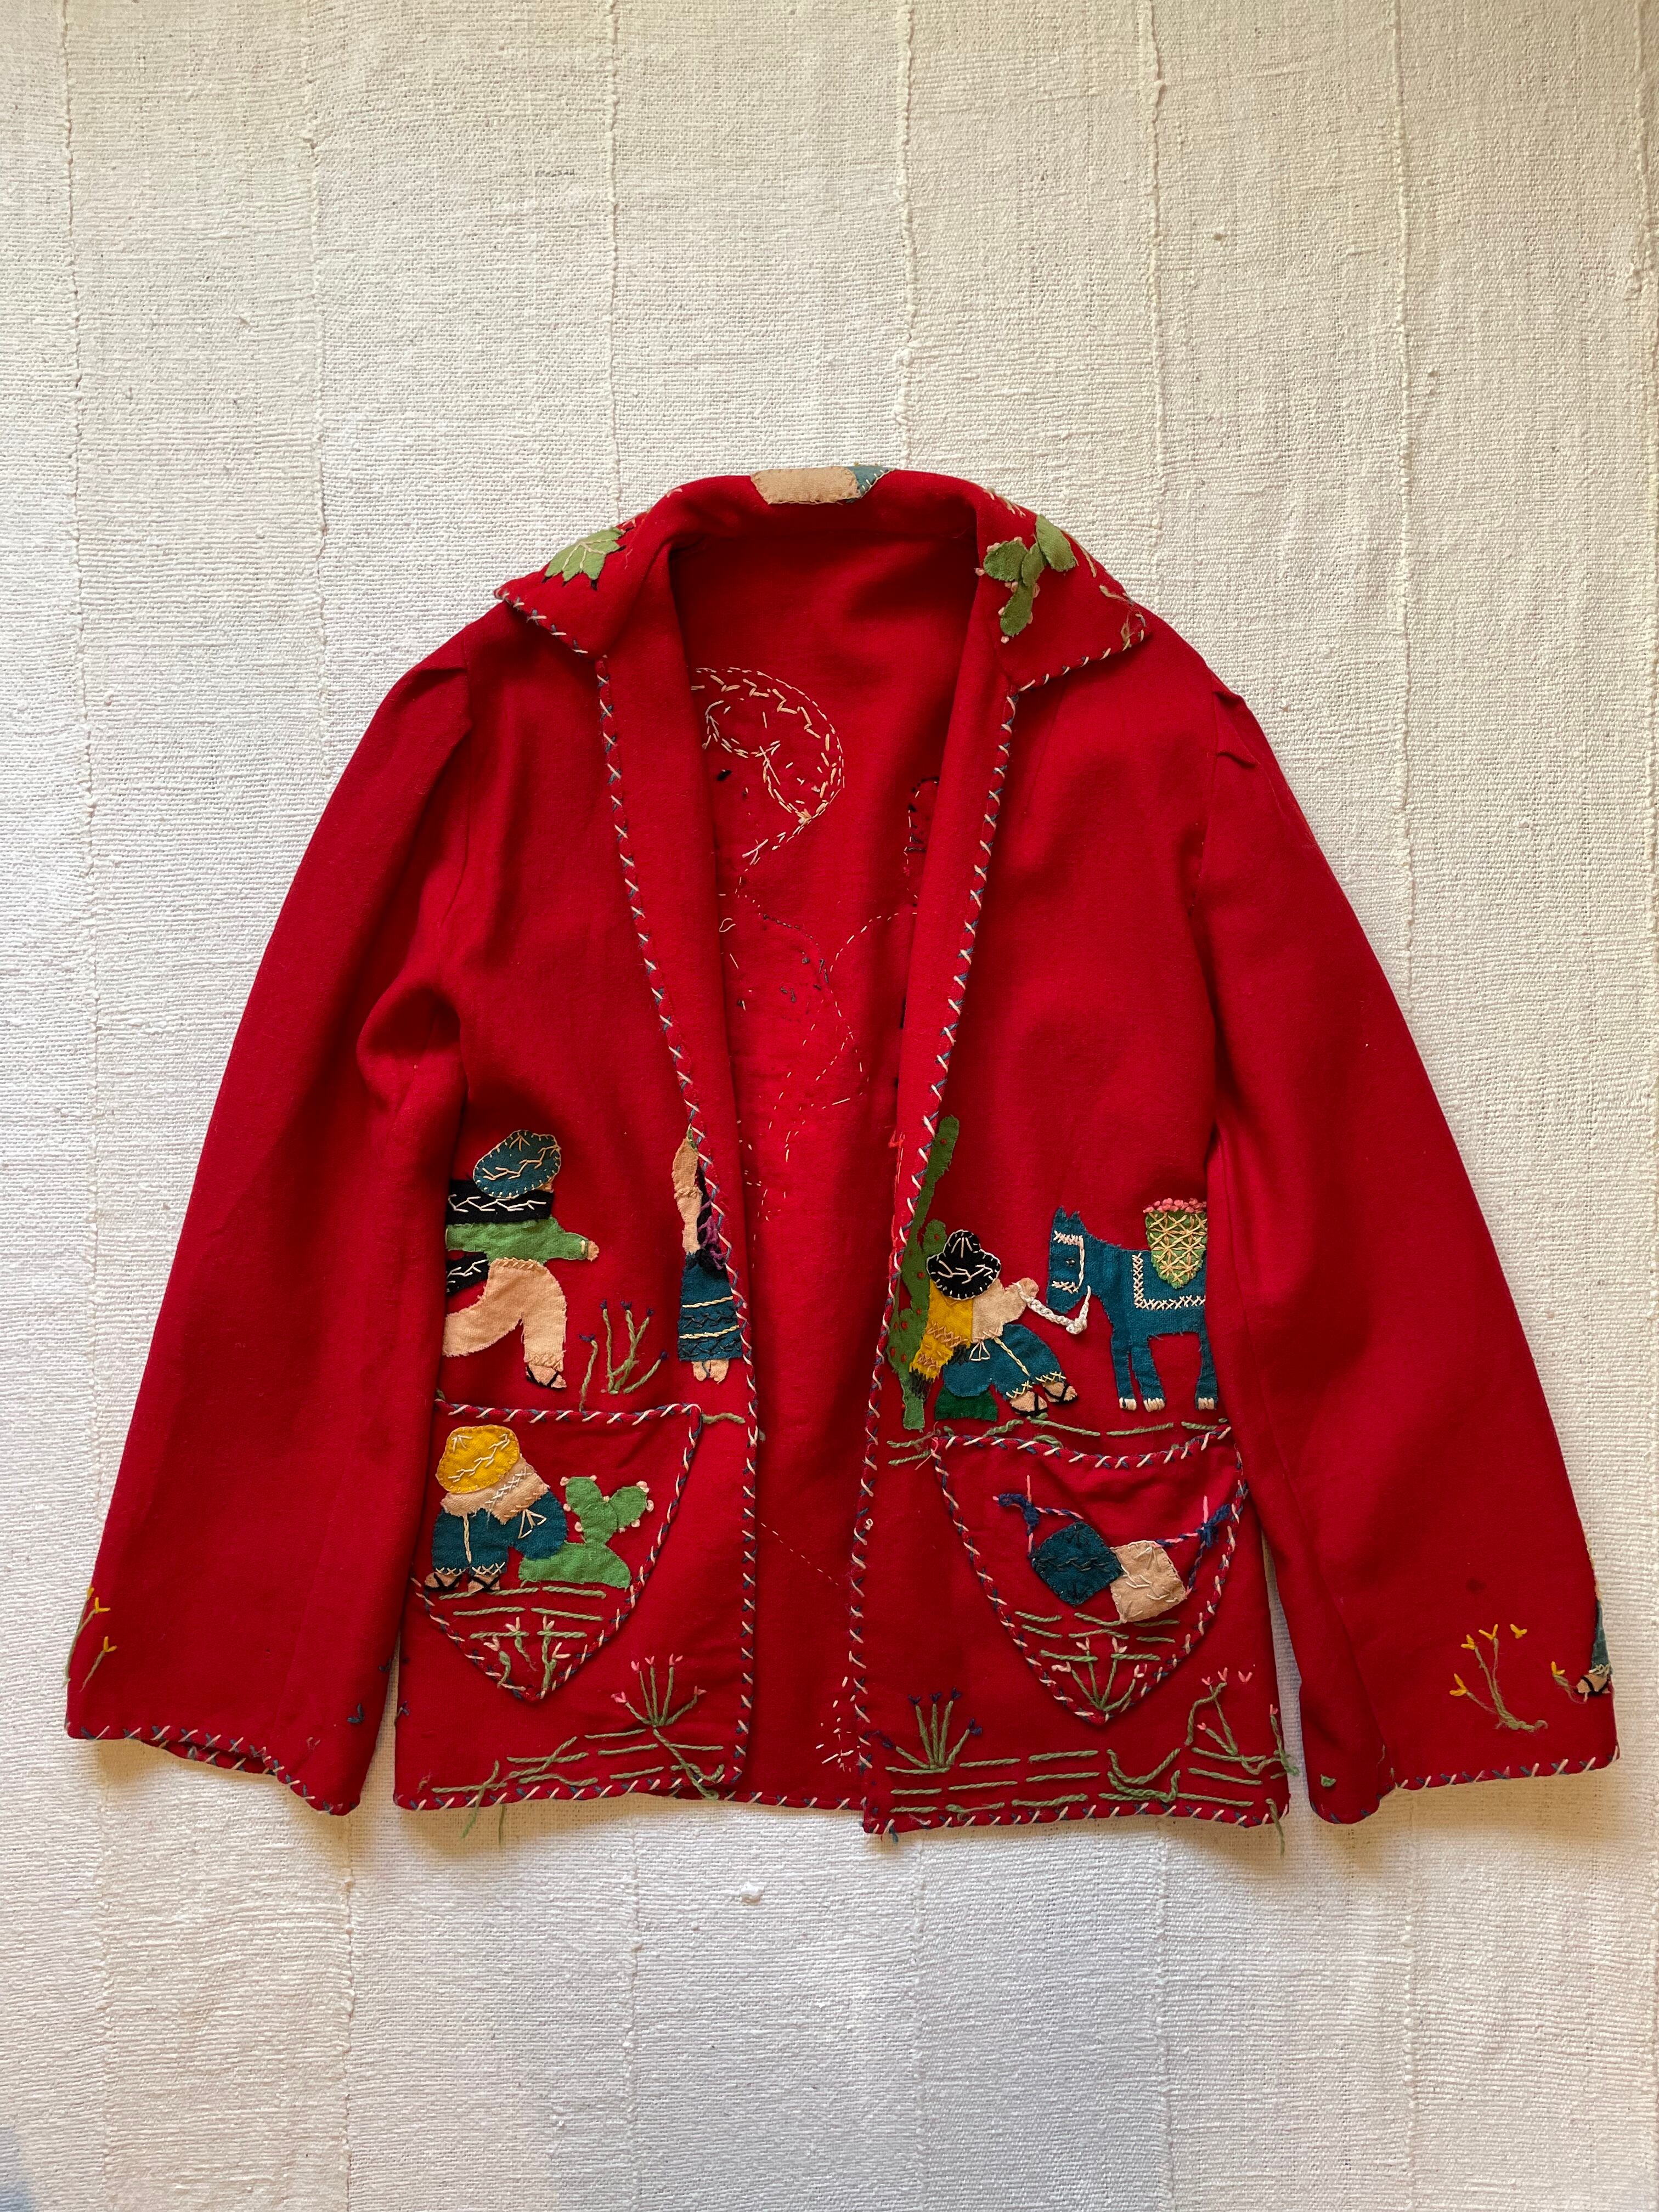 Vintage Mexican Red Jacket /ヴィンテージ メキシカン ウール ジャケット 刺繍